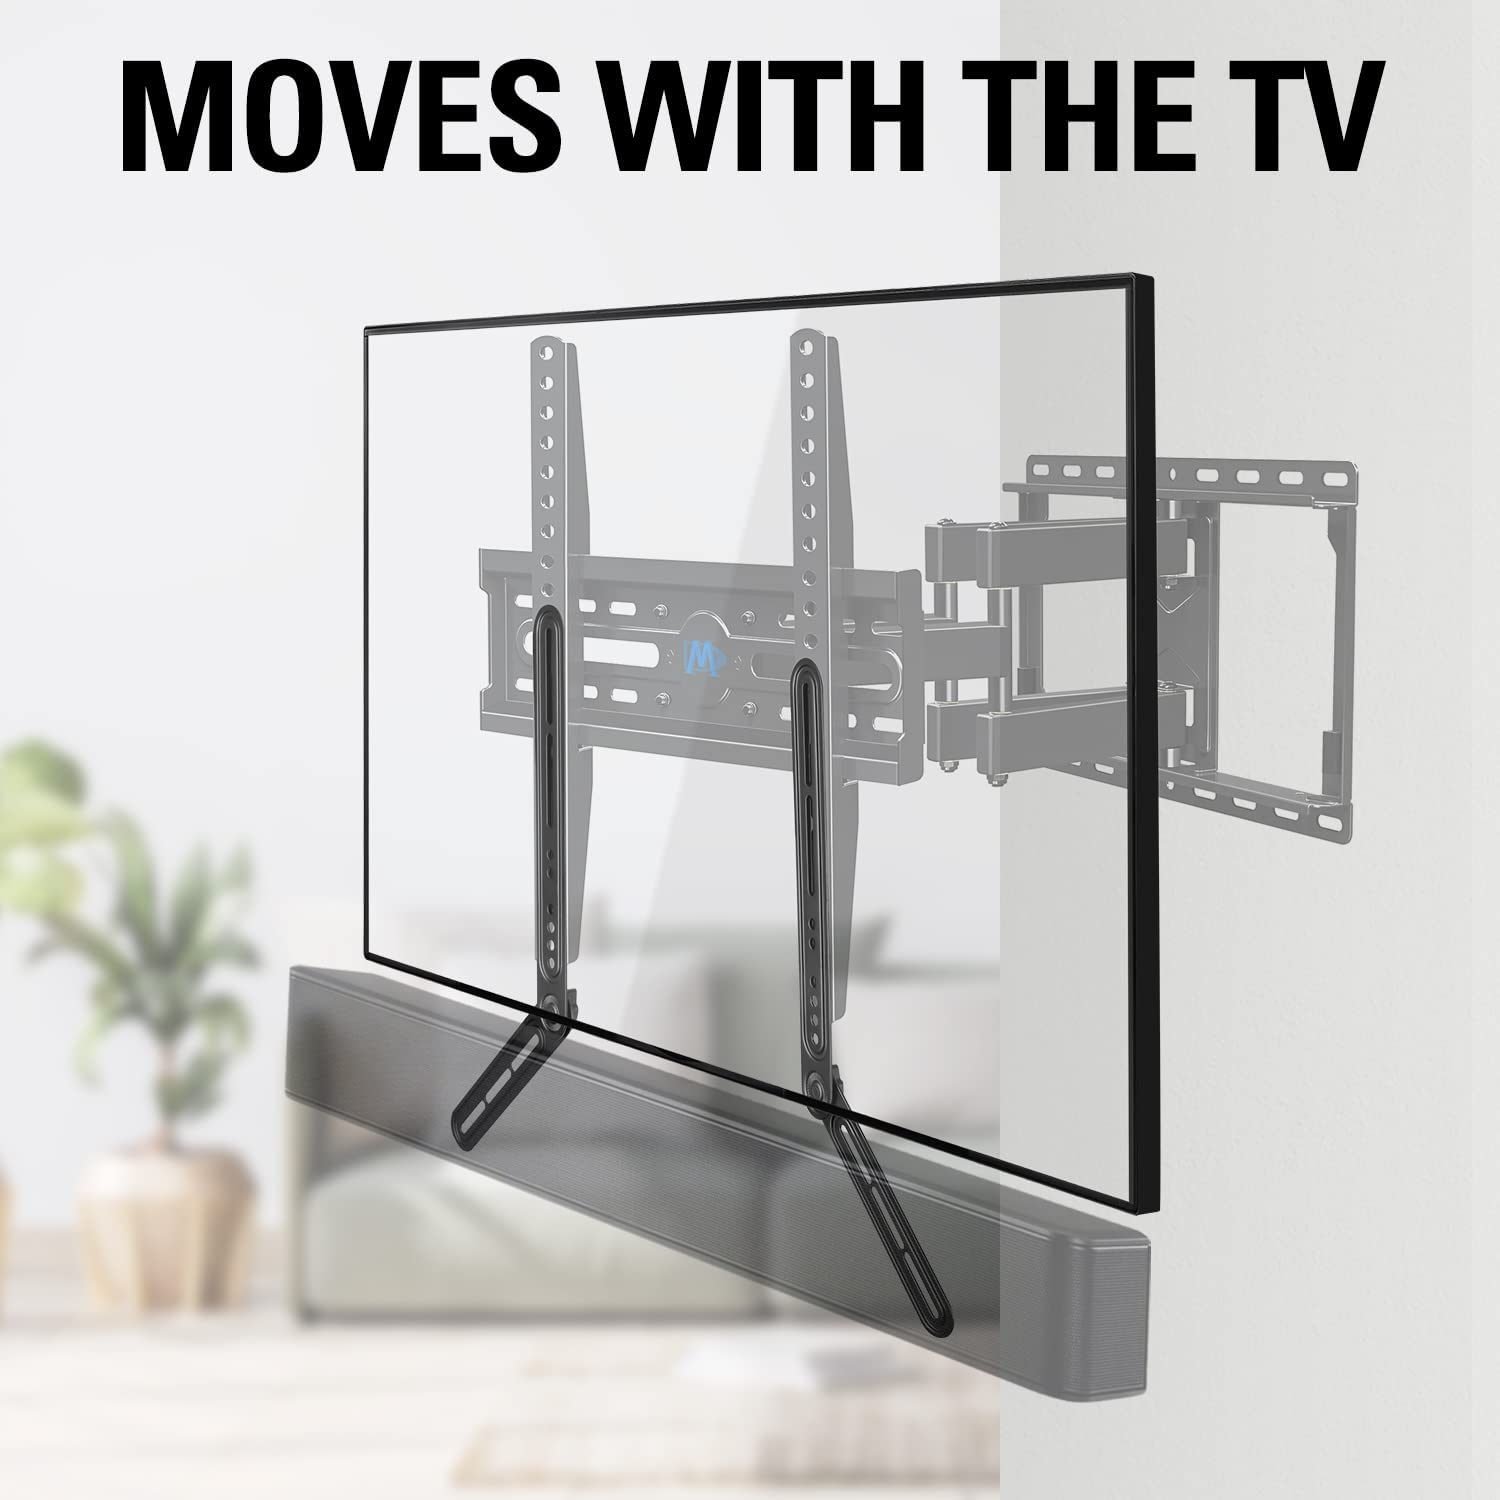 Mounting Dream MD5420 TV Bracket for Mounting Above or Under TV Fits Most of Sound Bars Up to 15 Lbs, MD5421 Soundbar Mount Sound Barwith Detachable Long and Short Extension Plates